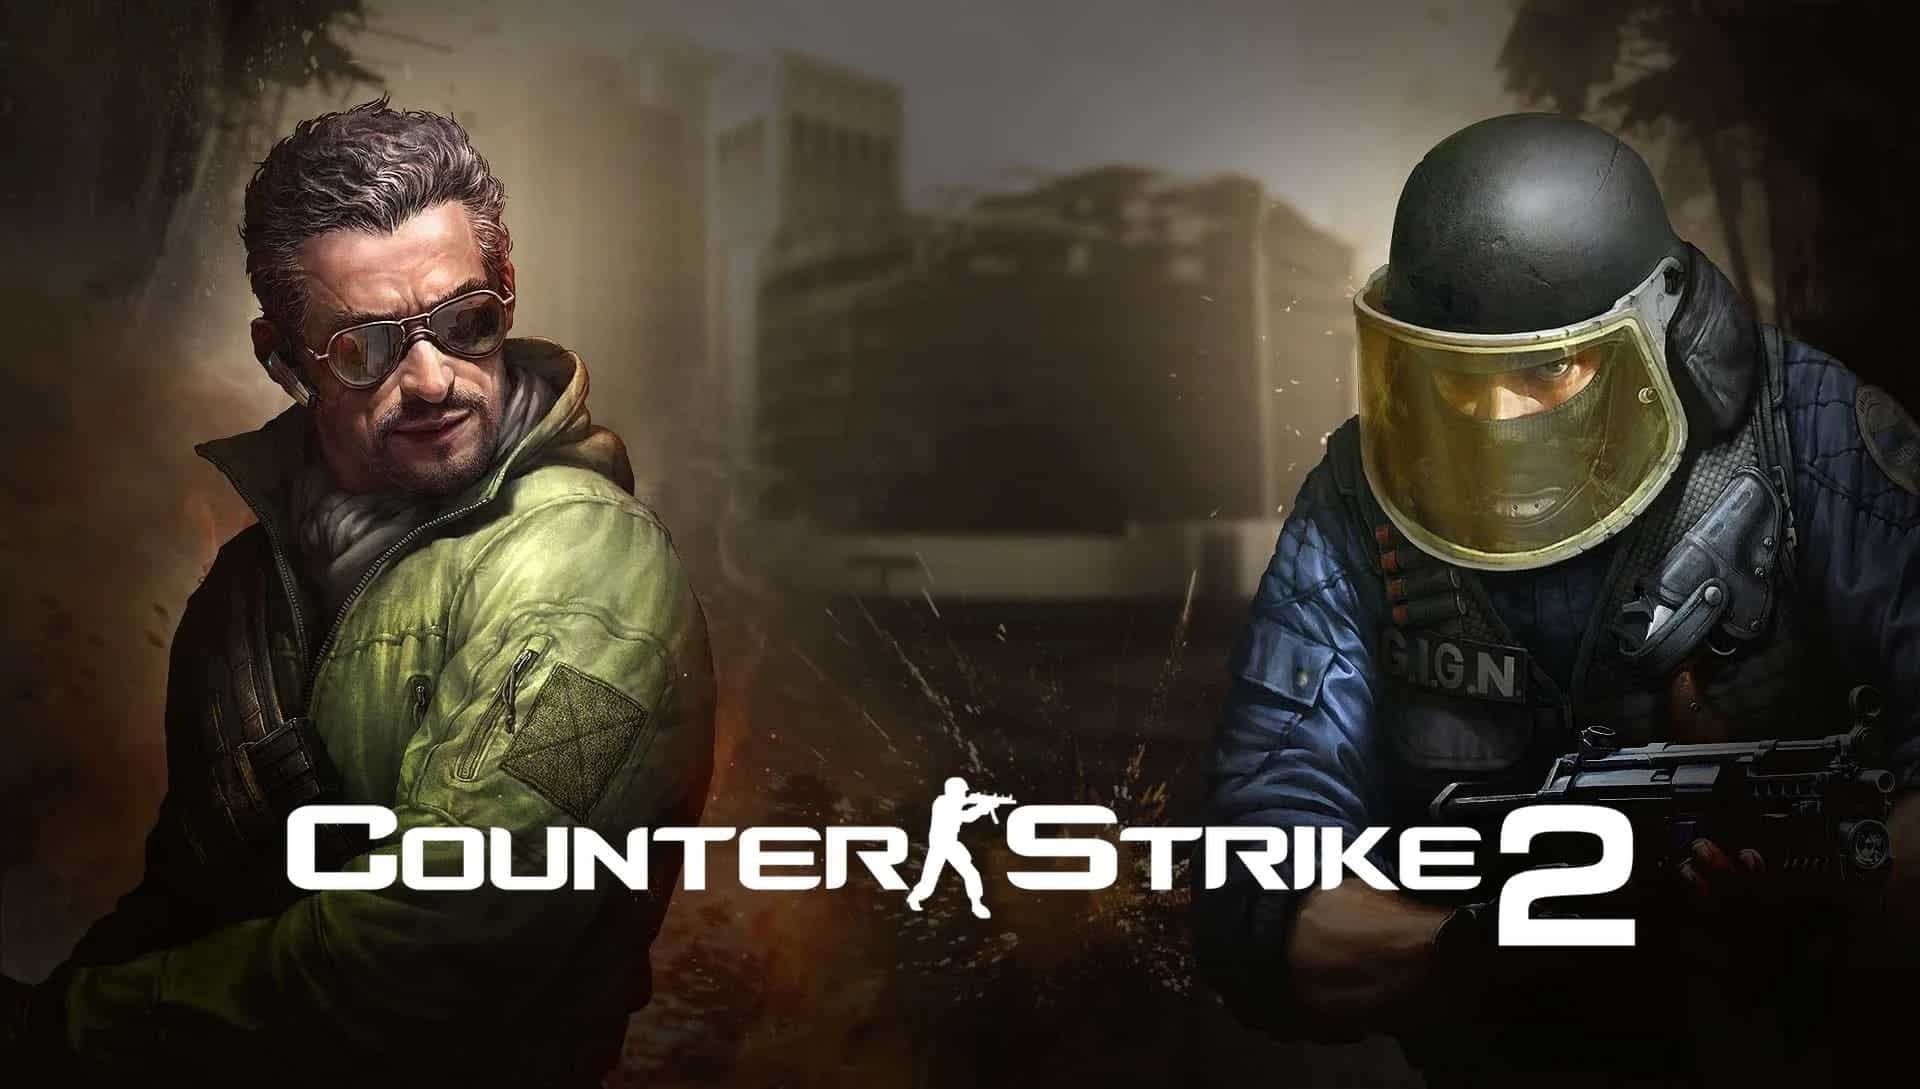 Counter Strike 2’s files appeared on the last update of Dota 2